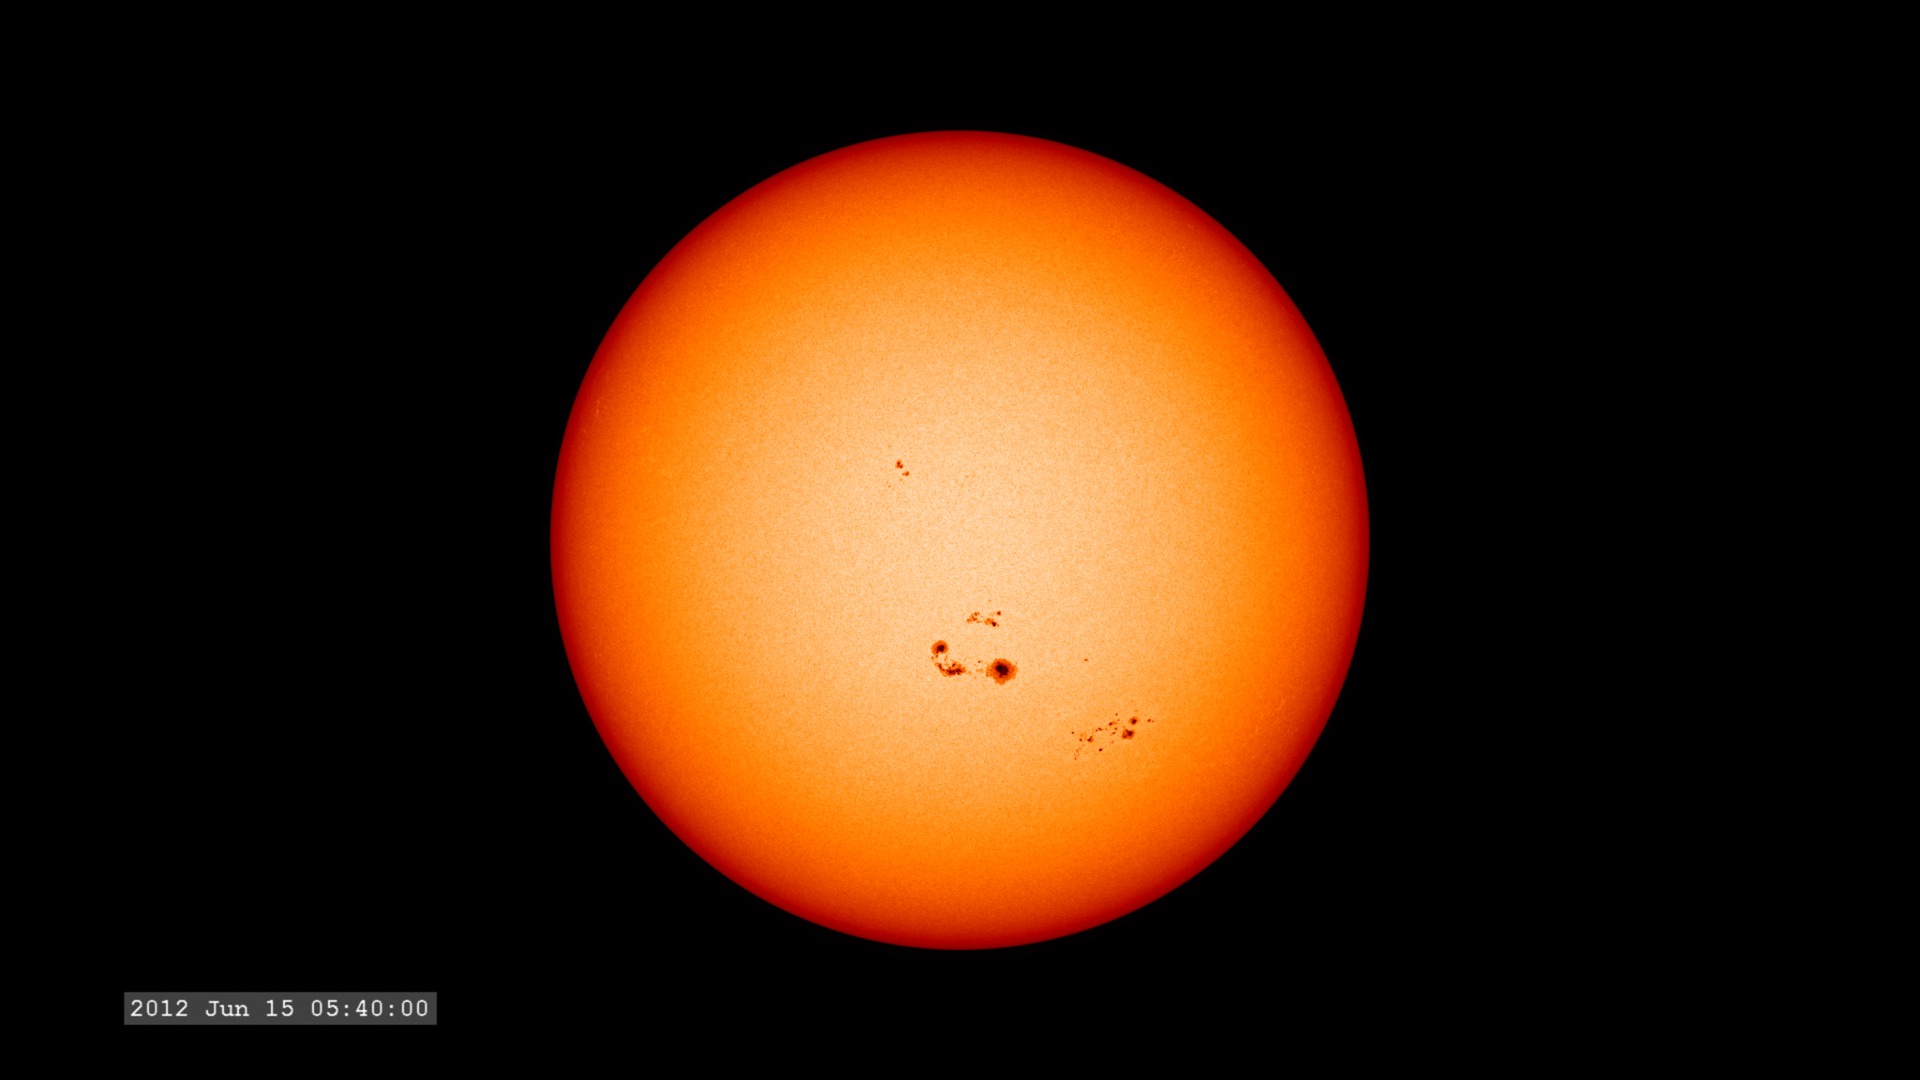 Preview Image for Sunspot Growth in June 2012